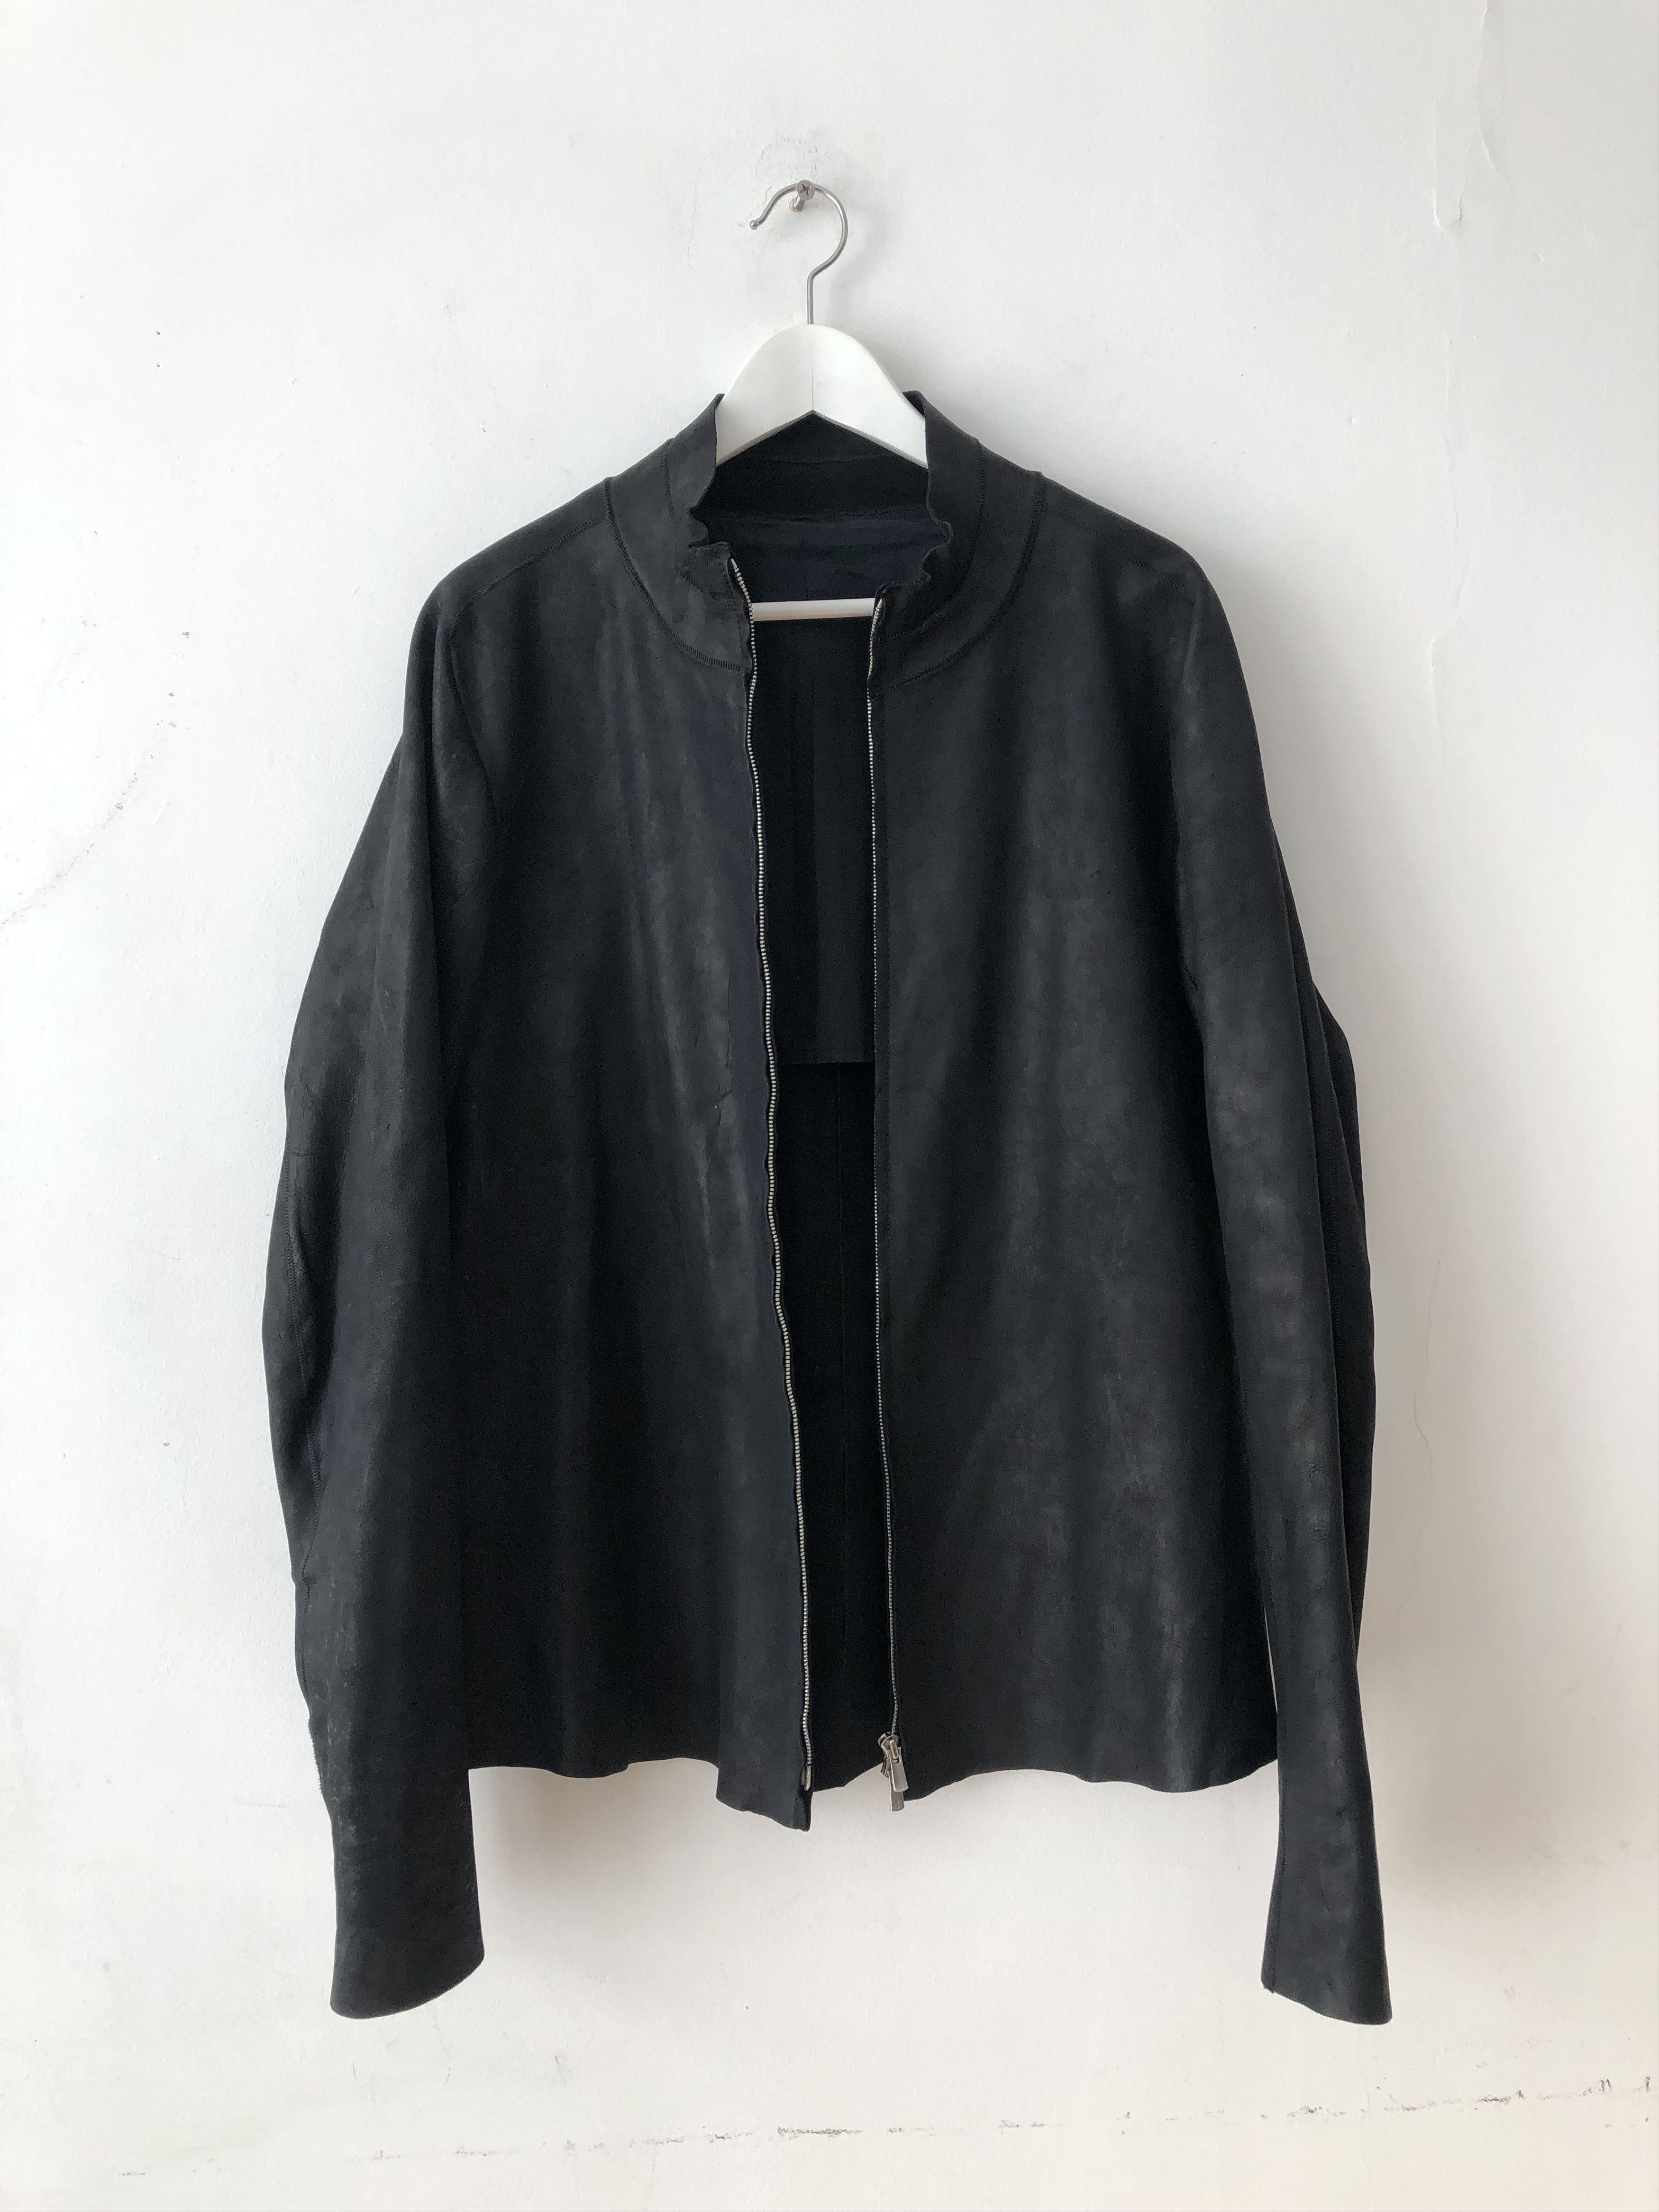 A1923 Horse Leather Jacket | Grailed